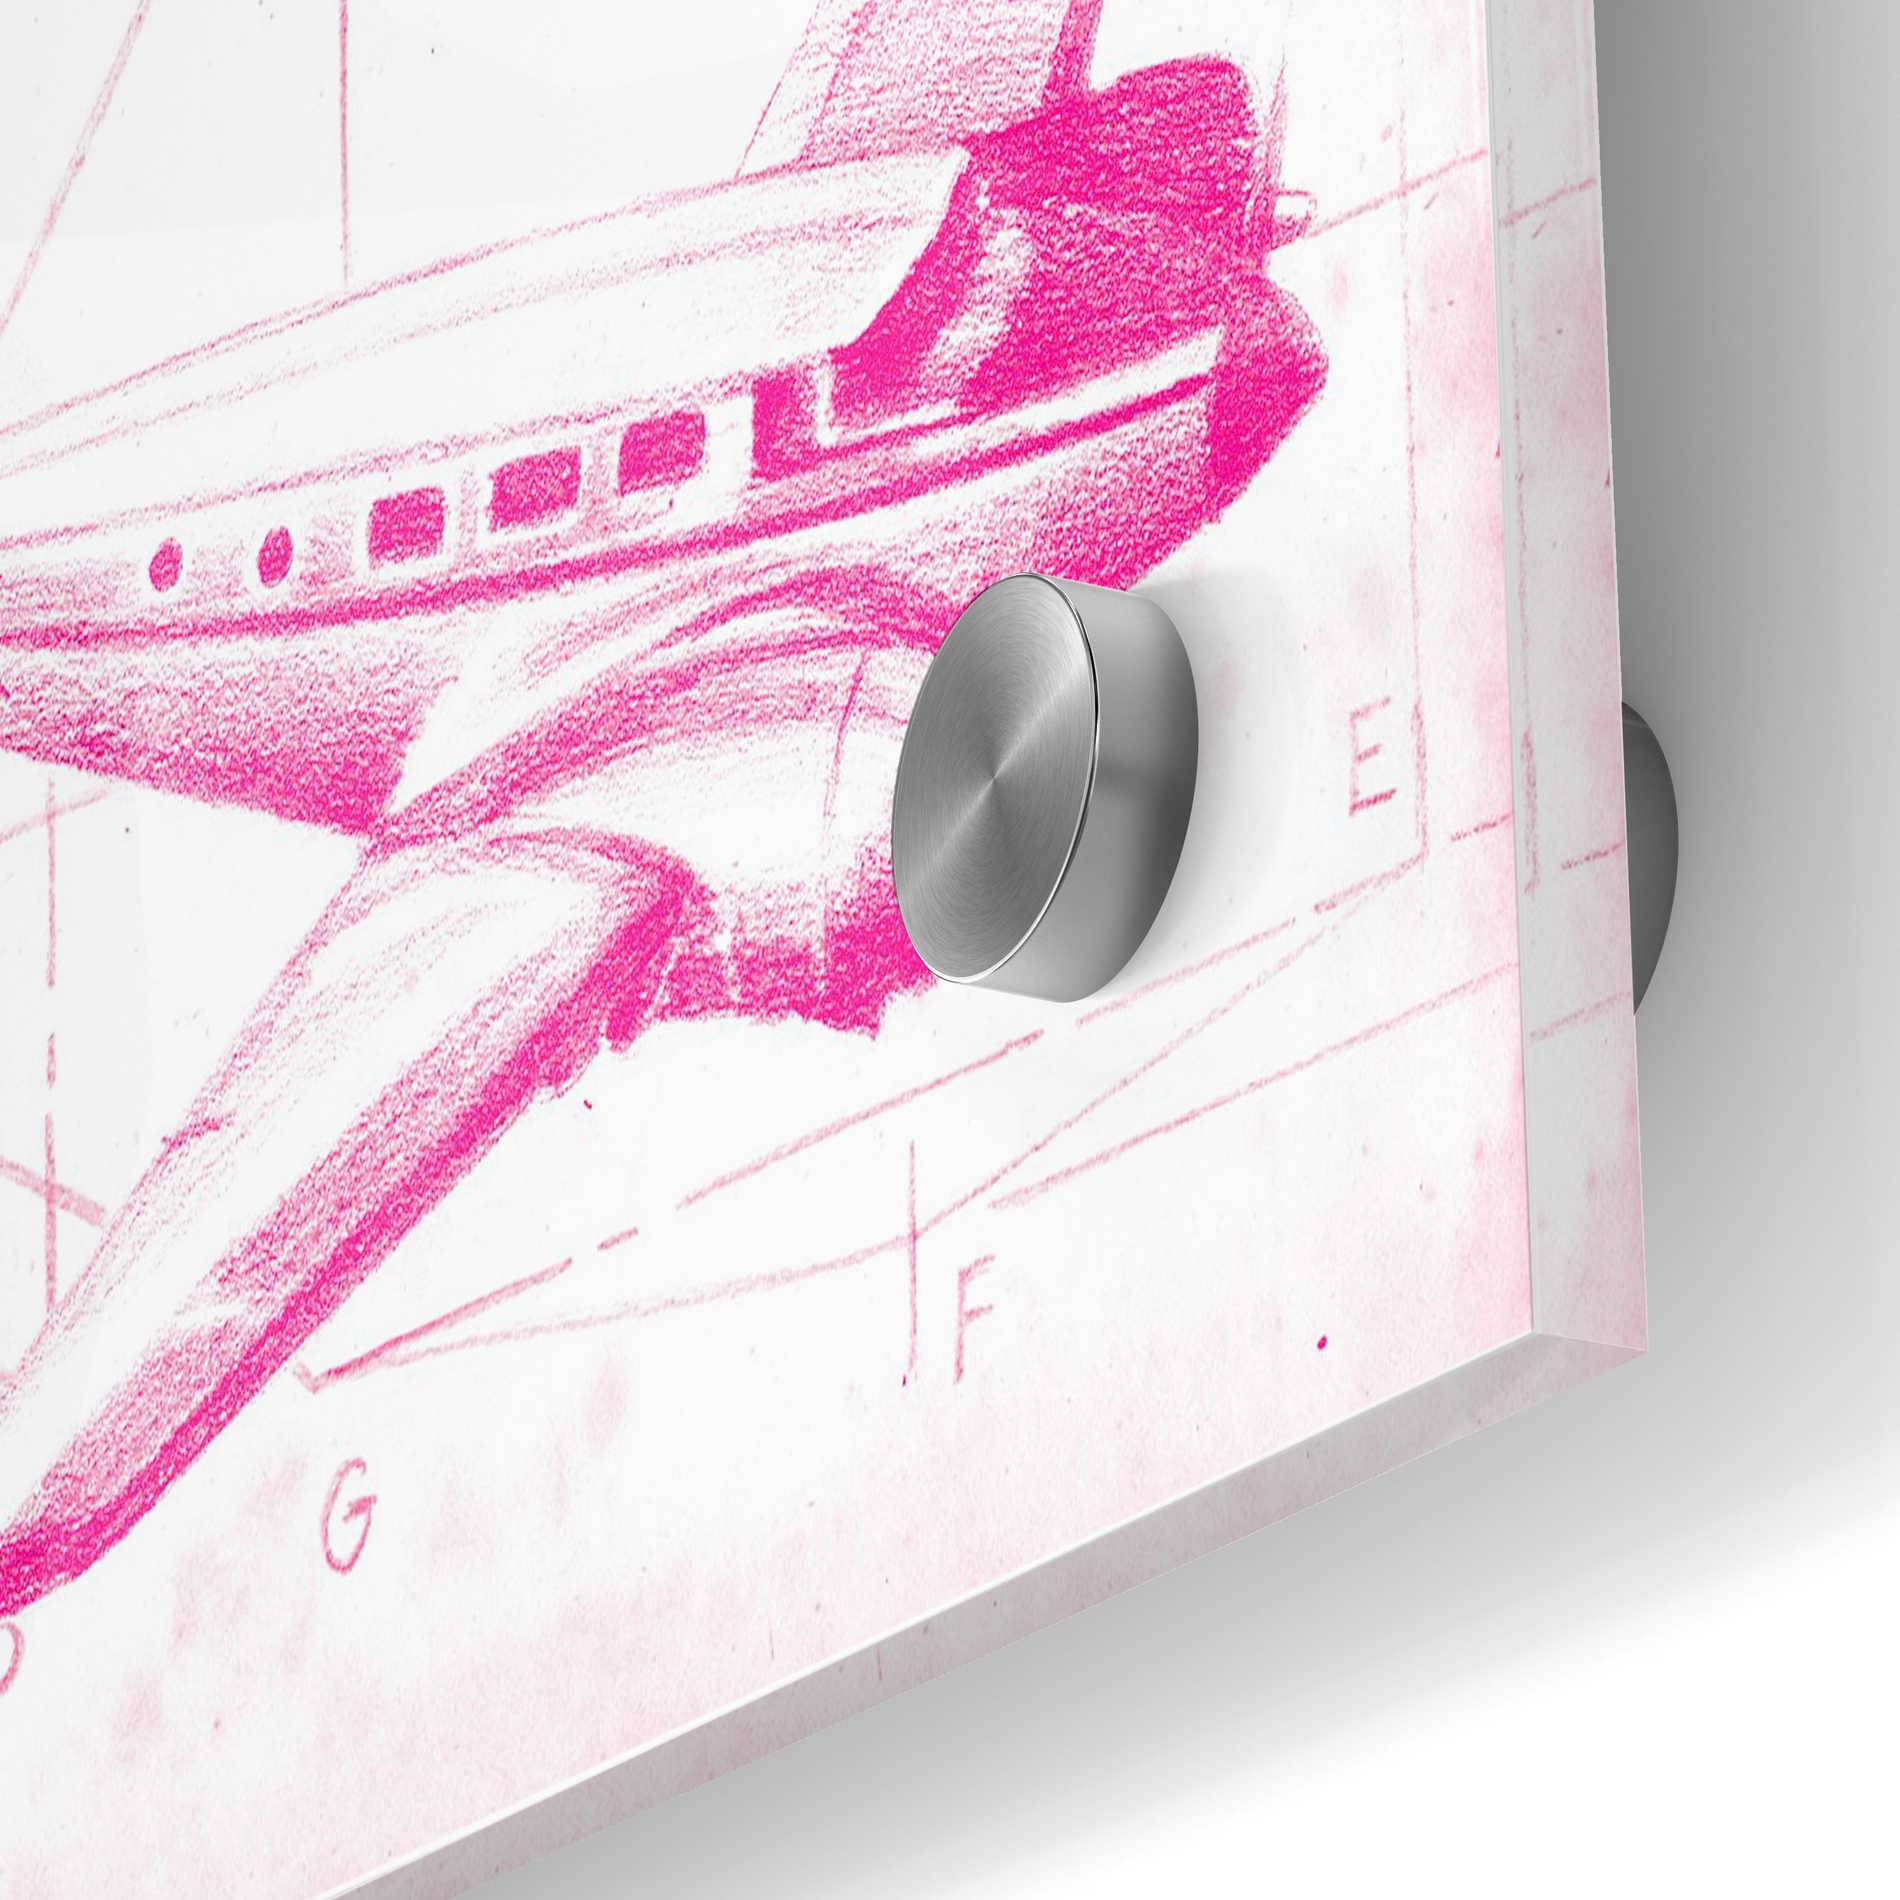 Epic Art 'Flight Schematic IV in Pink' by Ethan Harper Acrylic Glass Wall Art,24x36